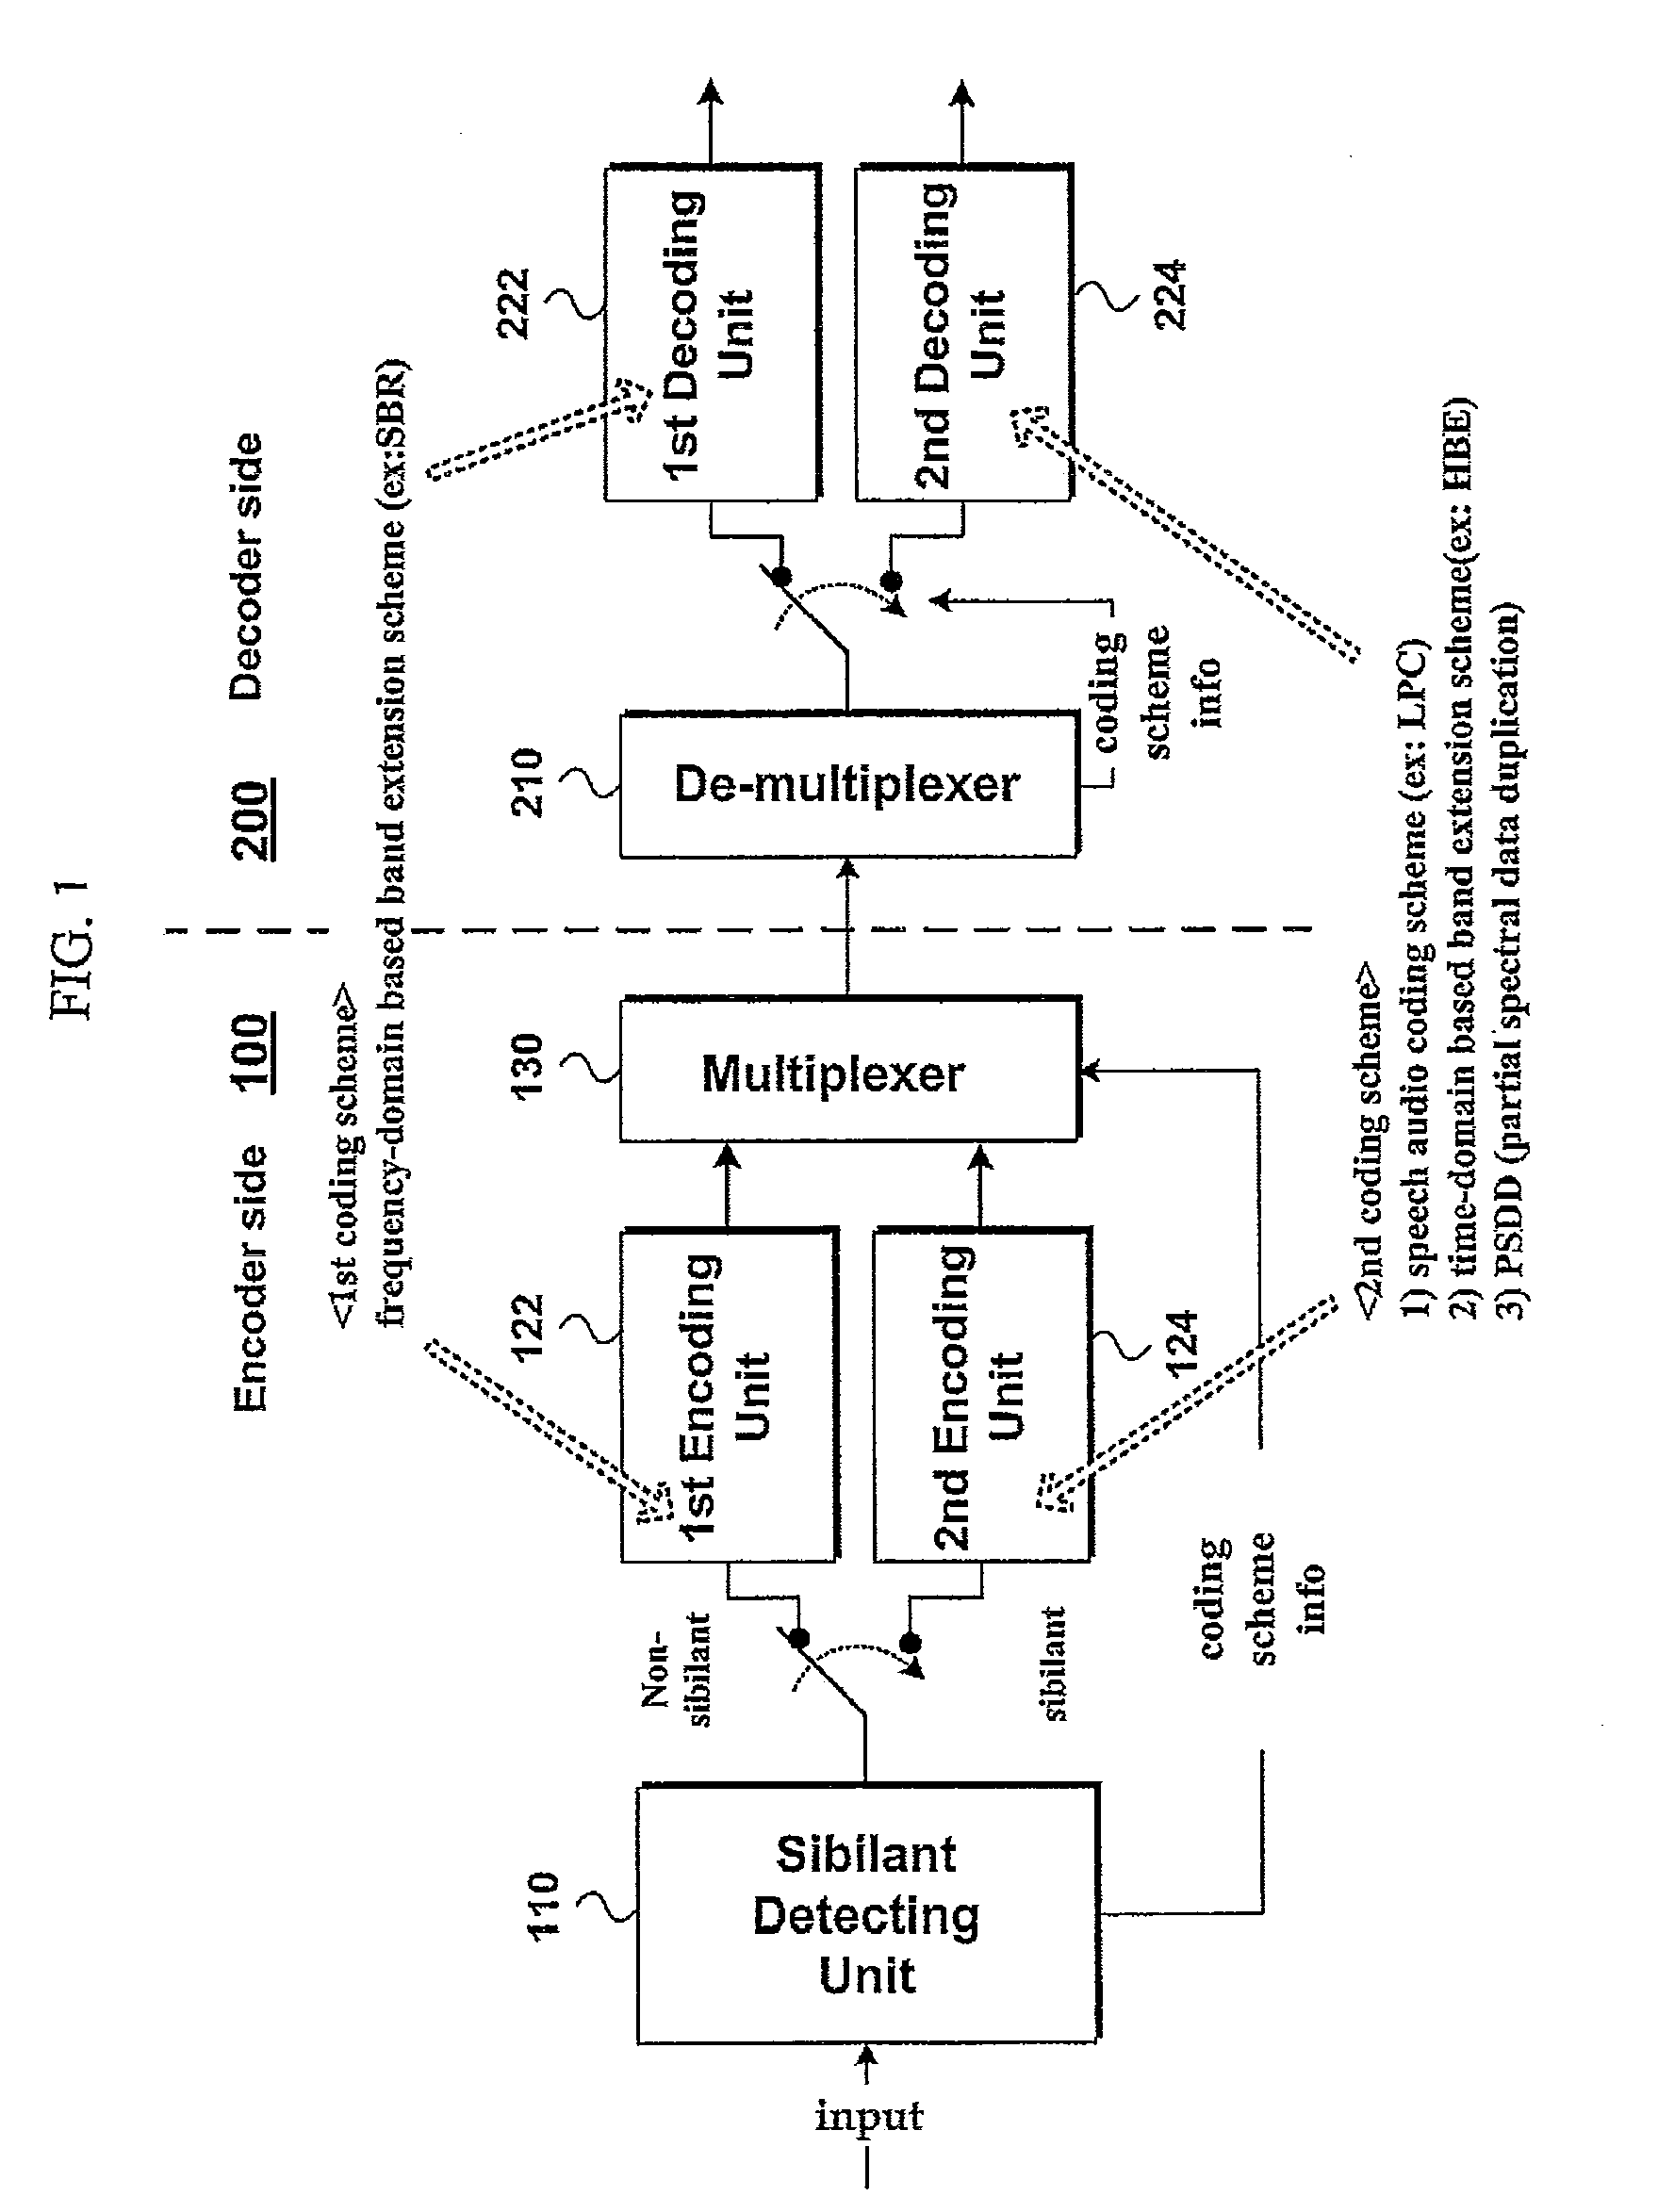 Apparatus for processing an audio signal and method thereof